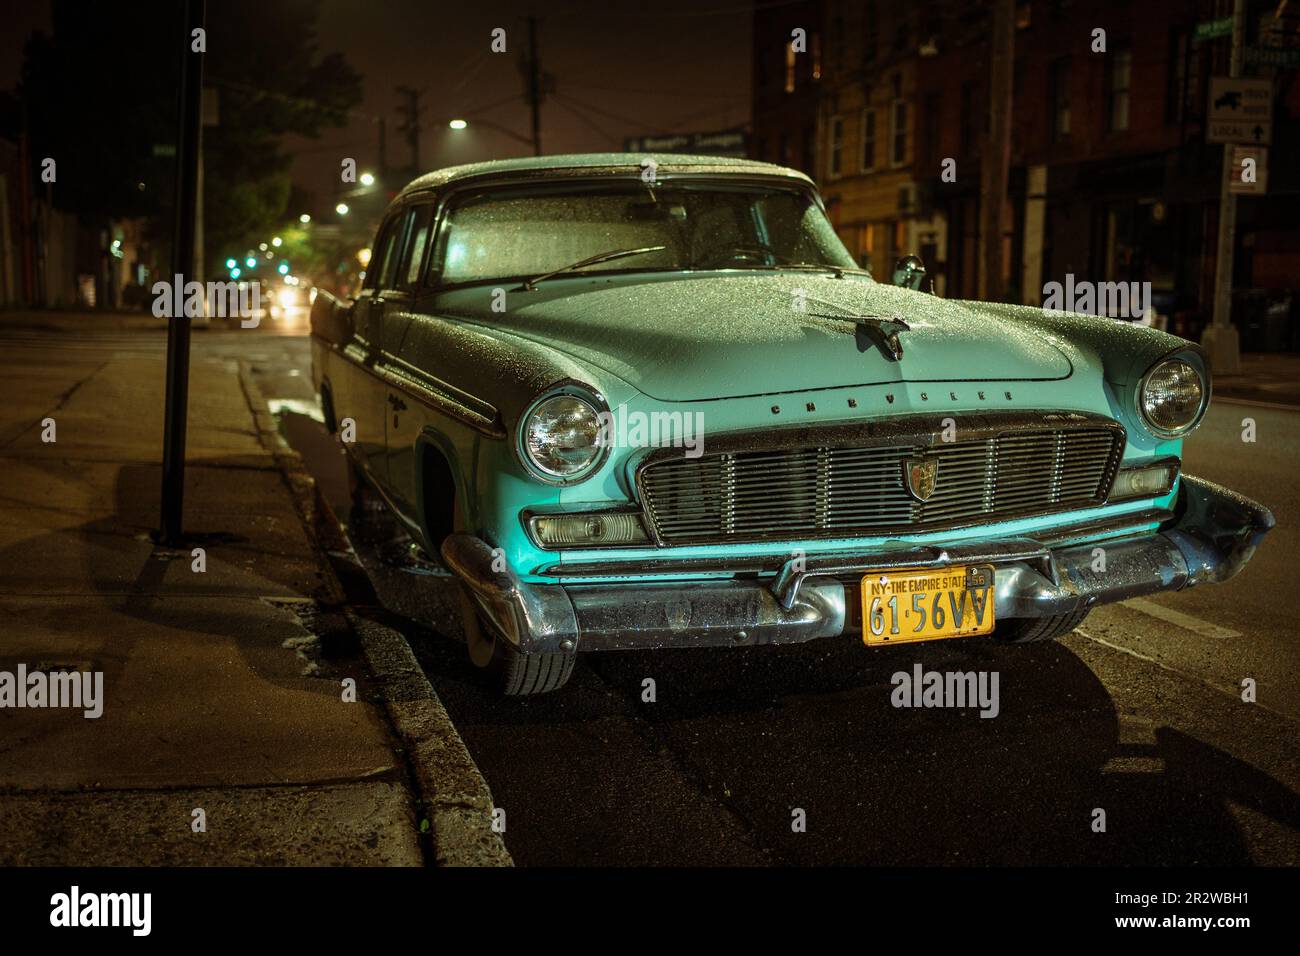 Vintage Chrysler car at night in Red Hook, Brooklyn, New York Stock Photo